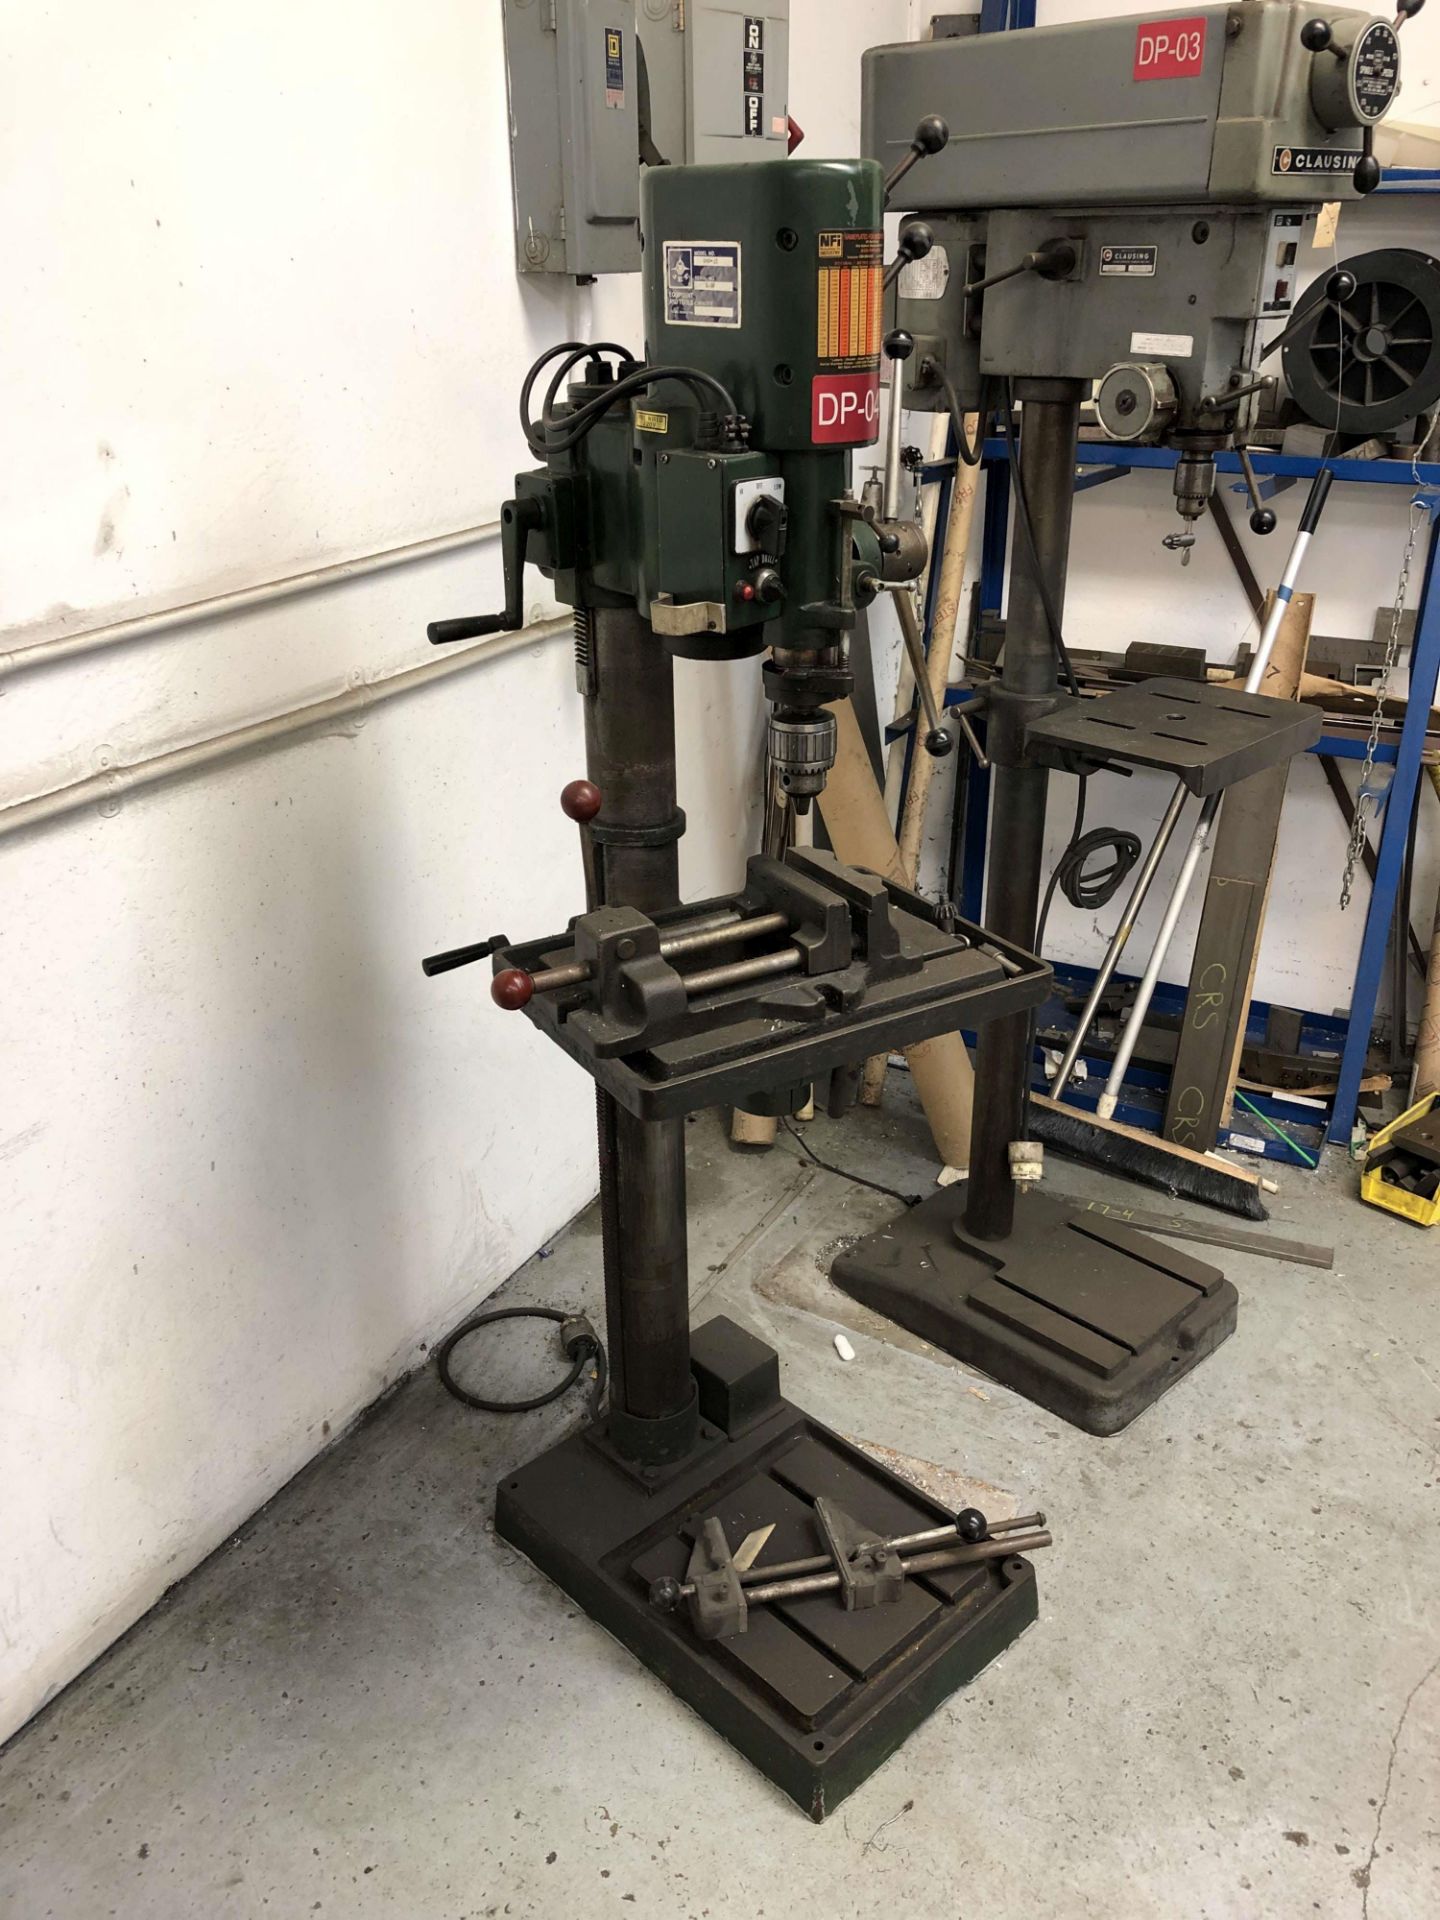 Jet 18" Floor Drill Press w/ Vise, Traveling Head, Model GHD-32, 100 to 2900 RPM - Image 2 of 4